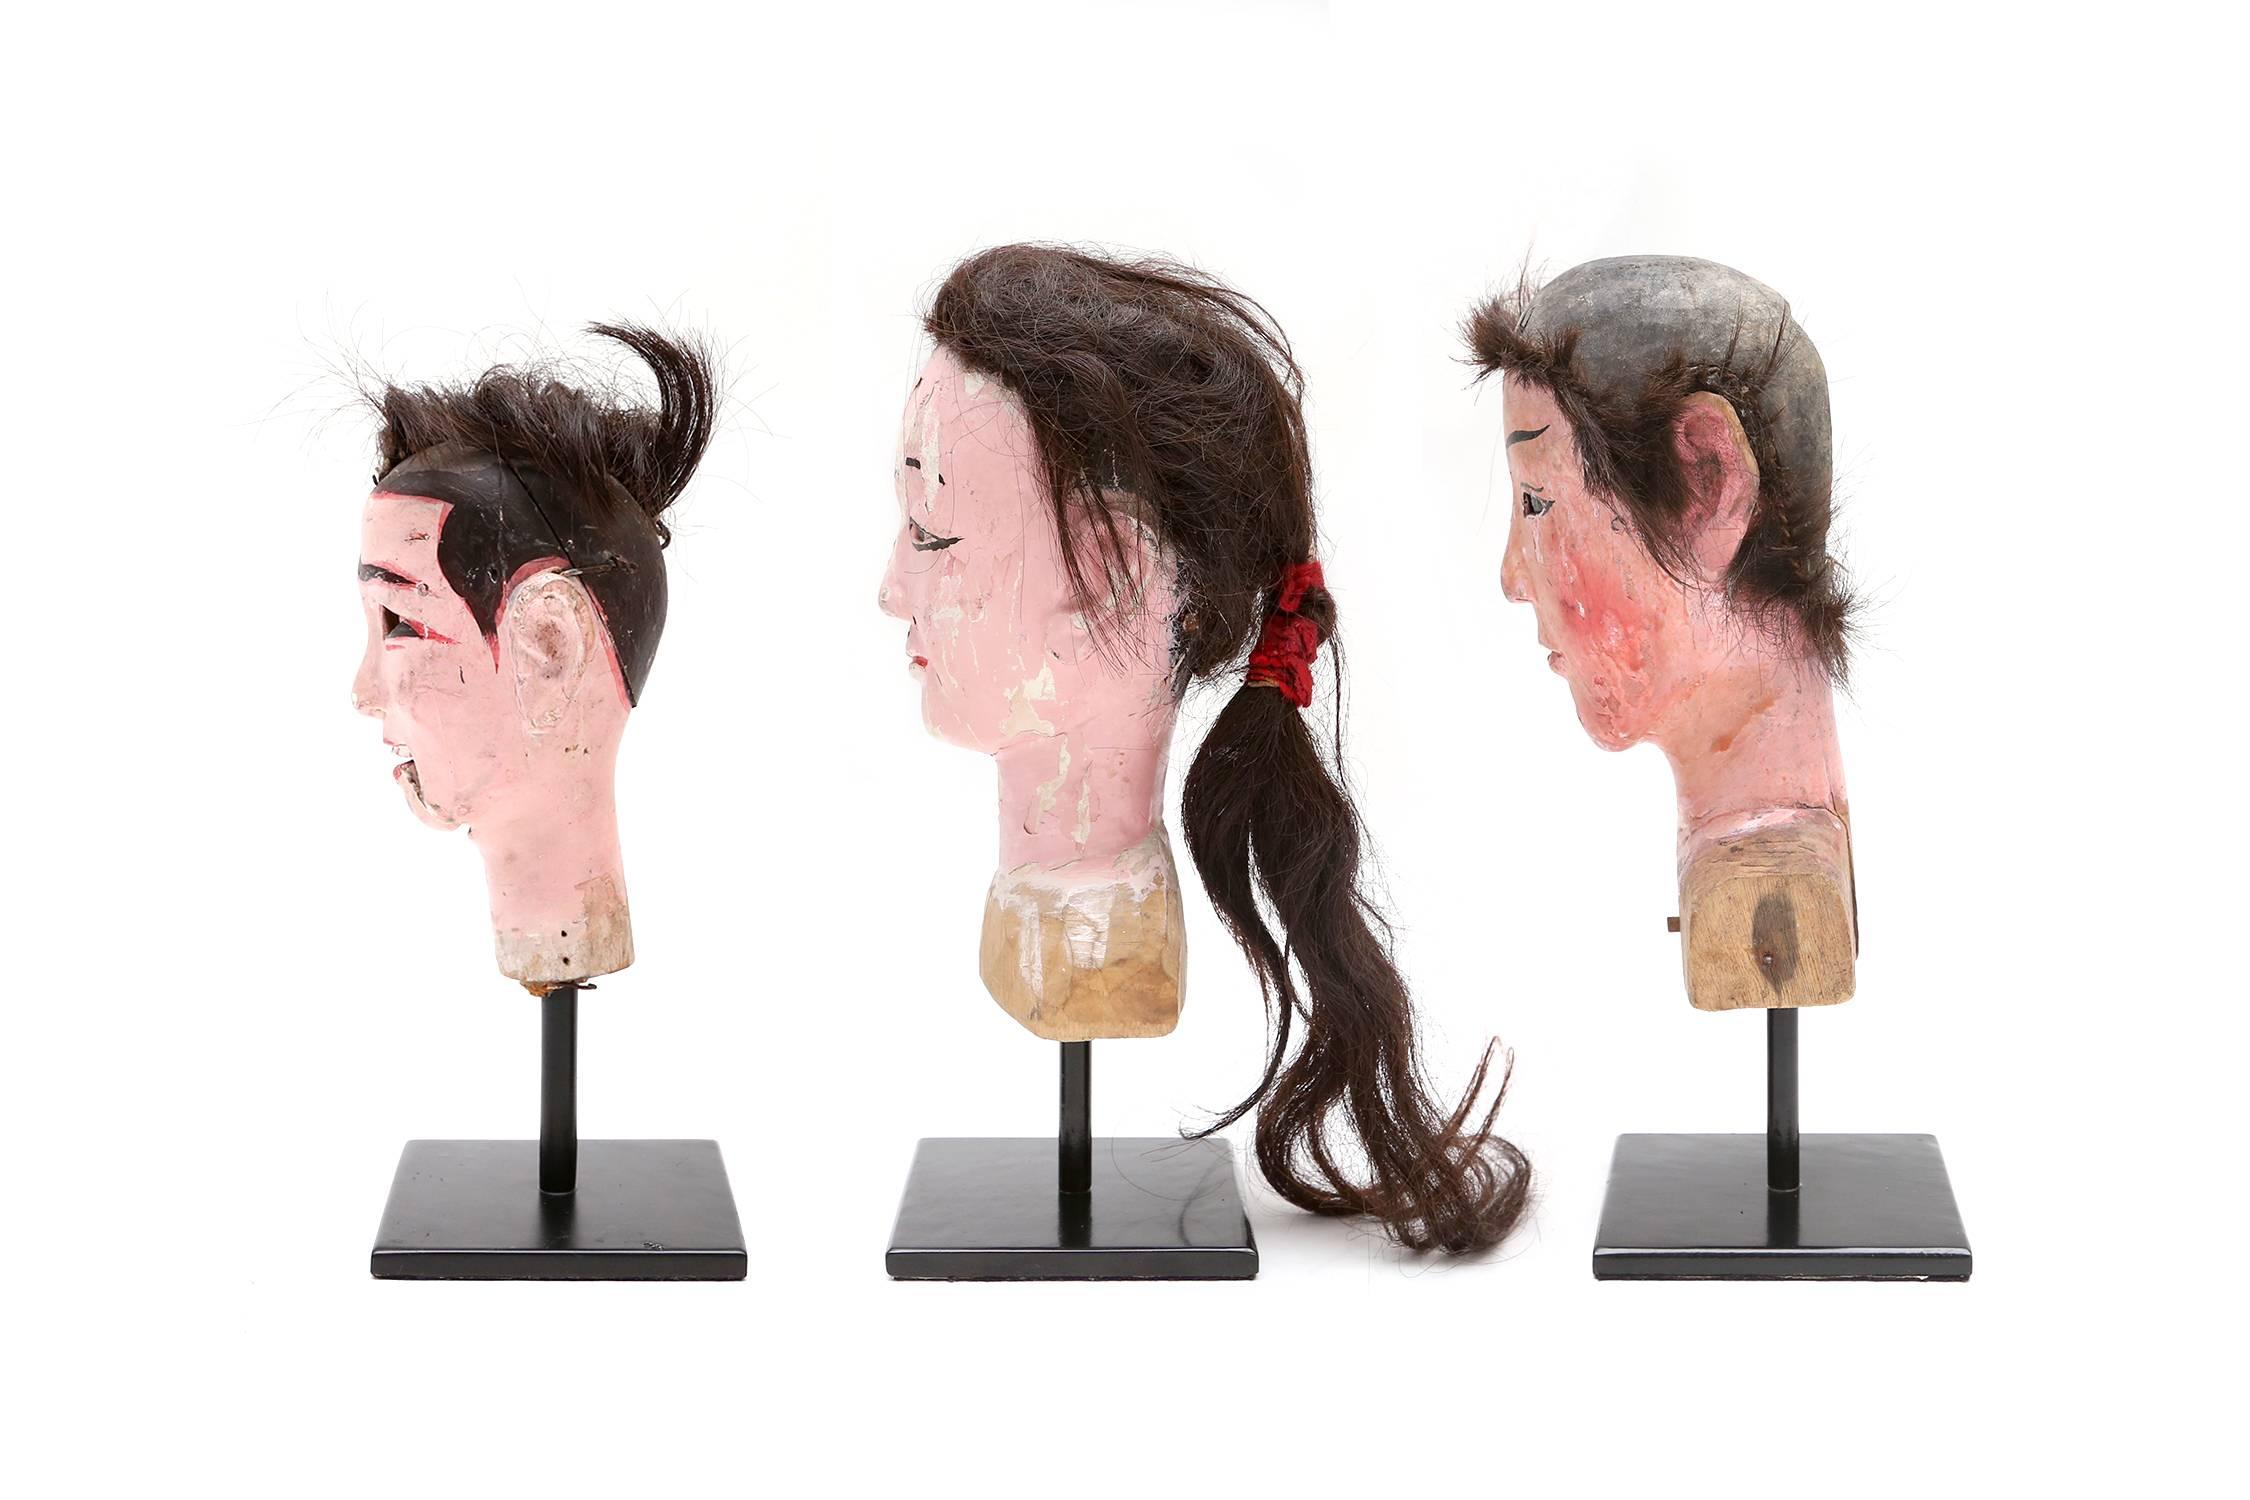 Antique wooden heads with real hair Victorian style
mounted on black metal base
Oriental curiosa, 19th century.
H 28 cm, D 10 cm, W 10 cm.